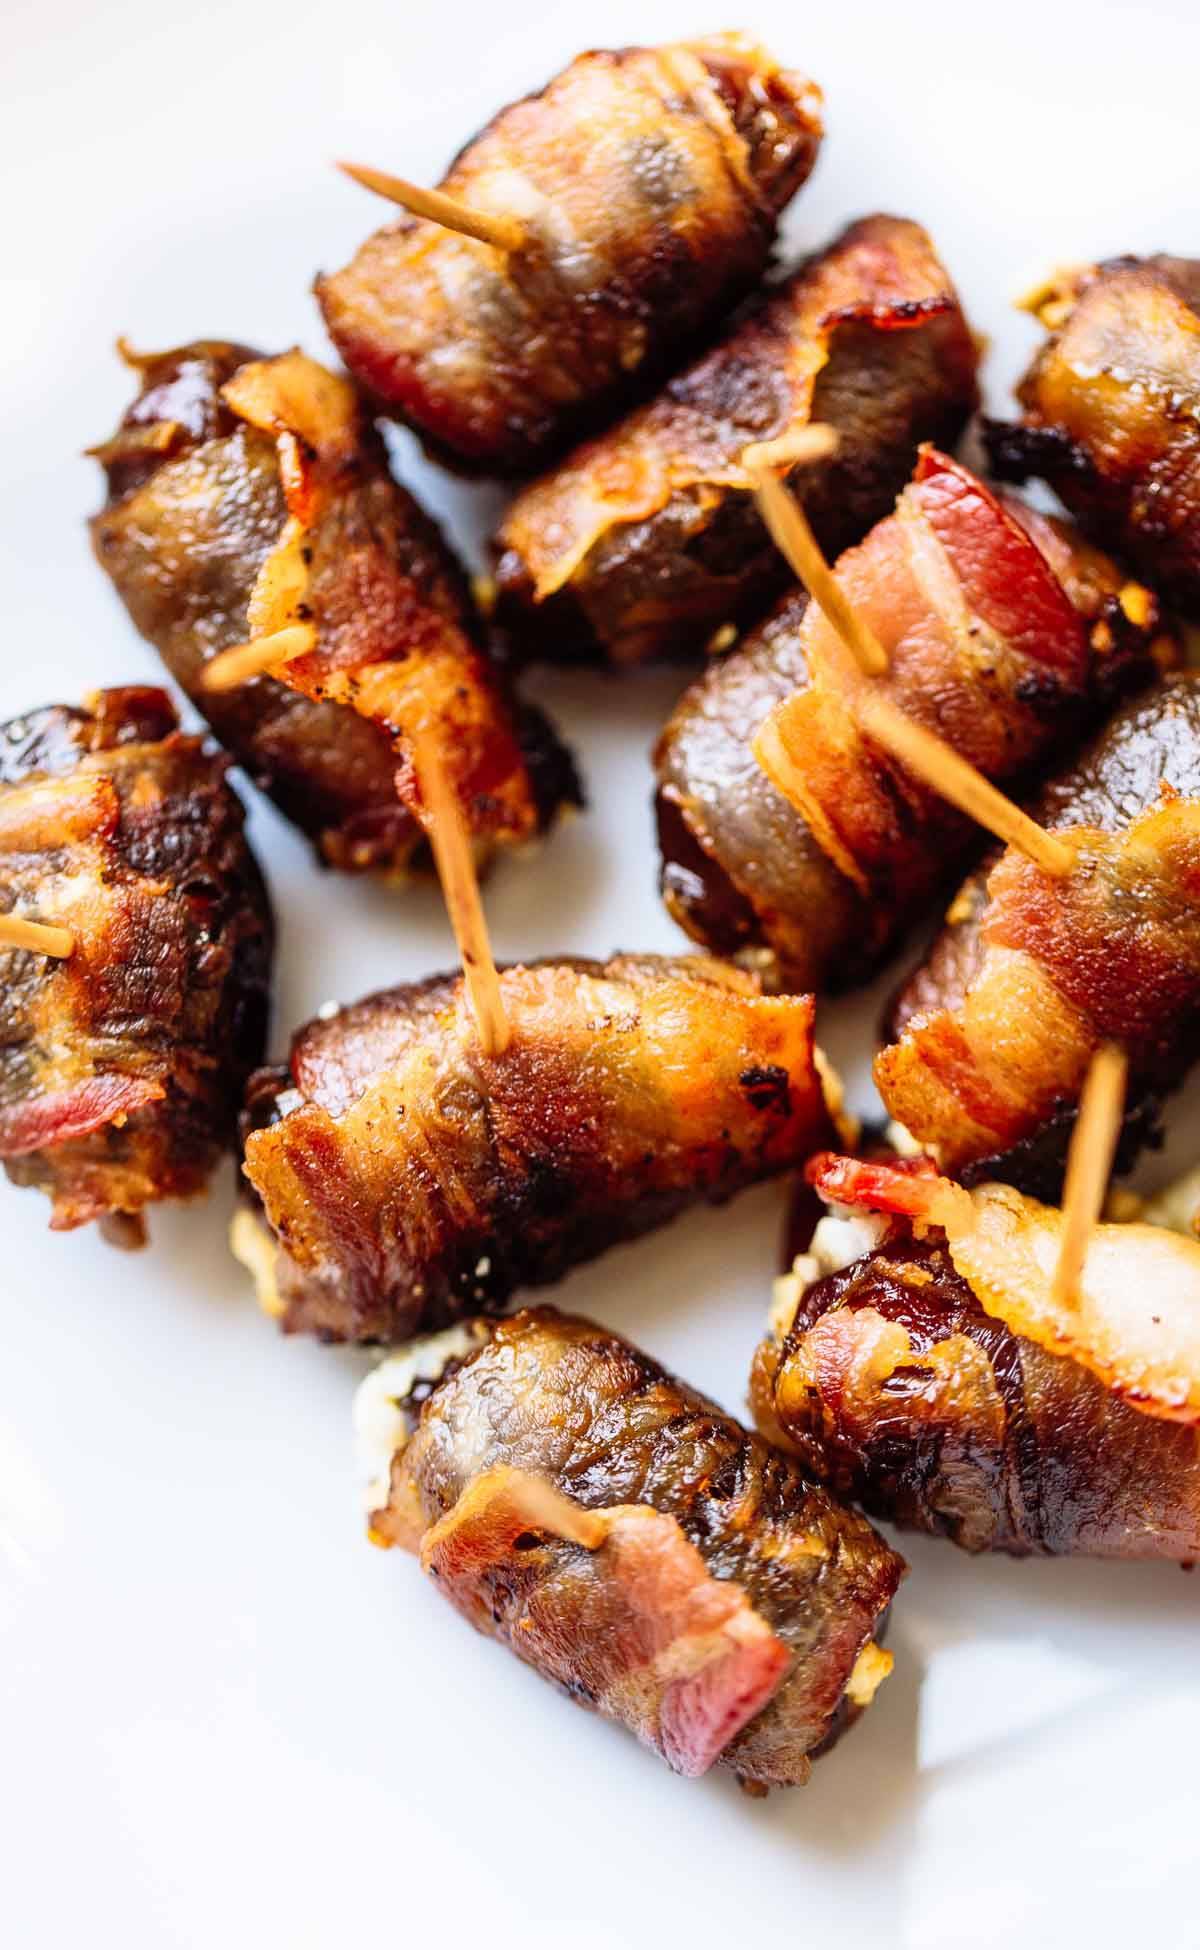 Bacon Wrapped Dates with Goat Cheese on toothpicks.